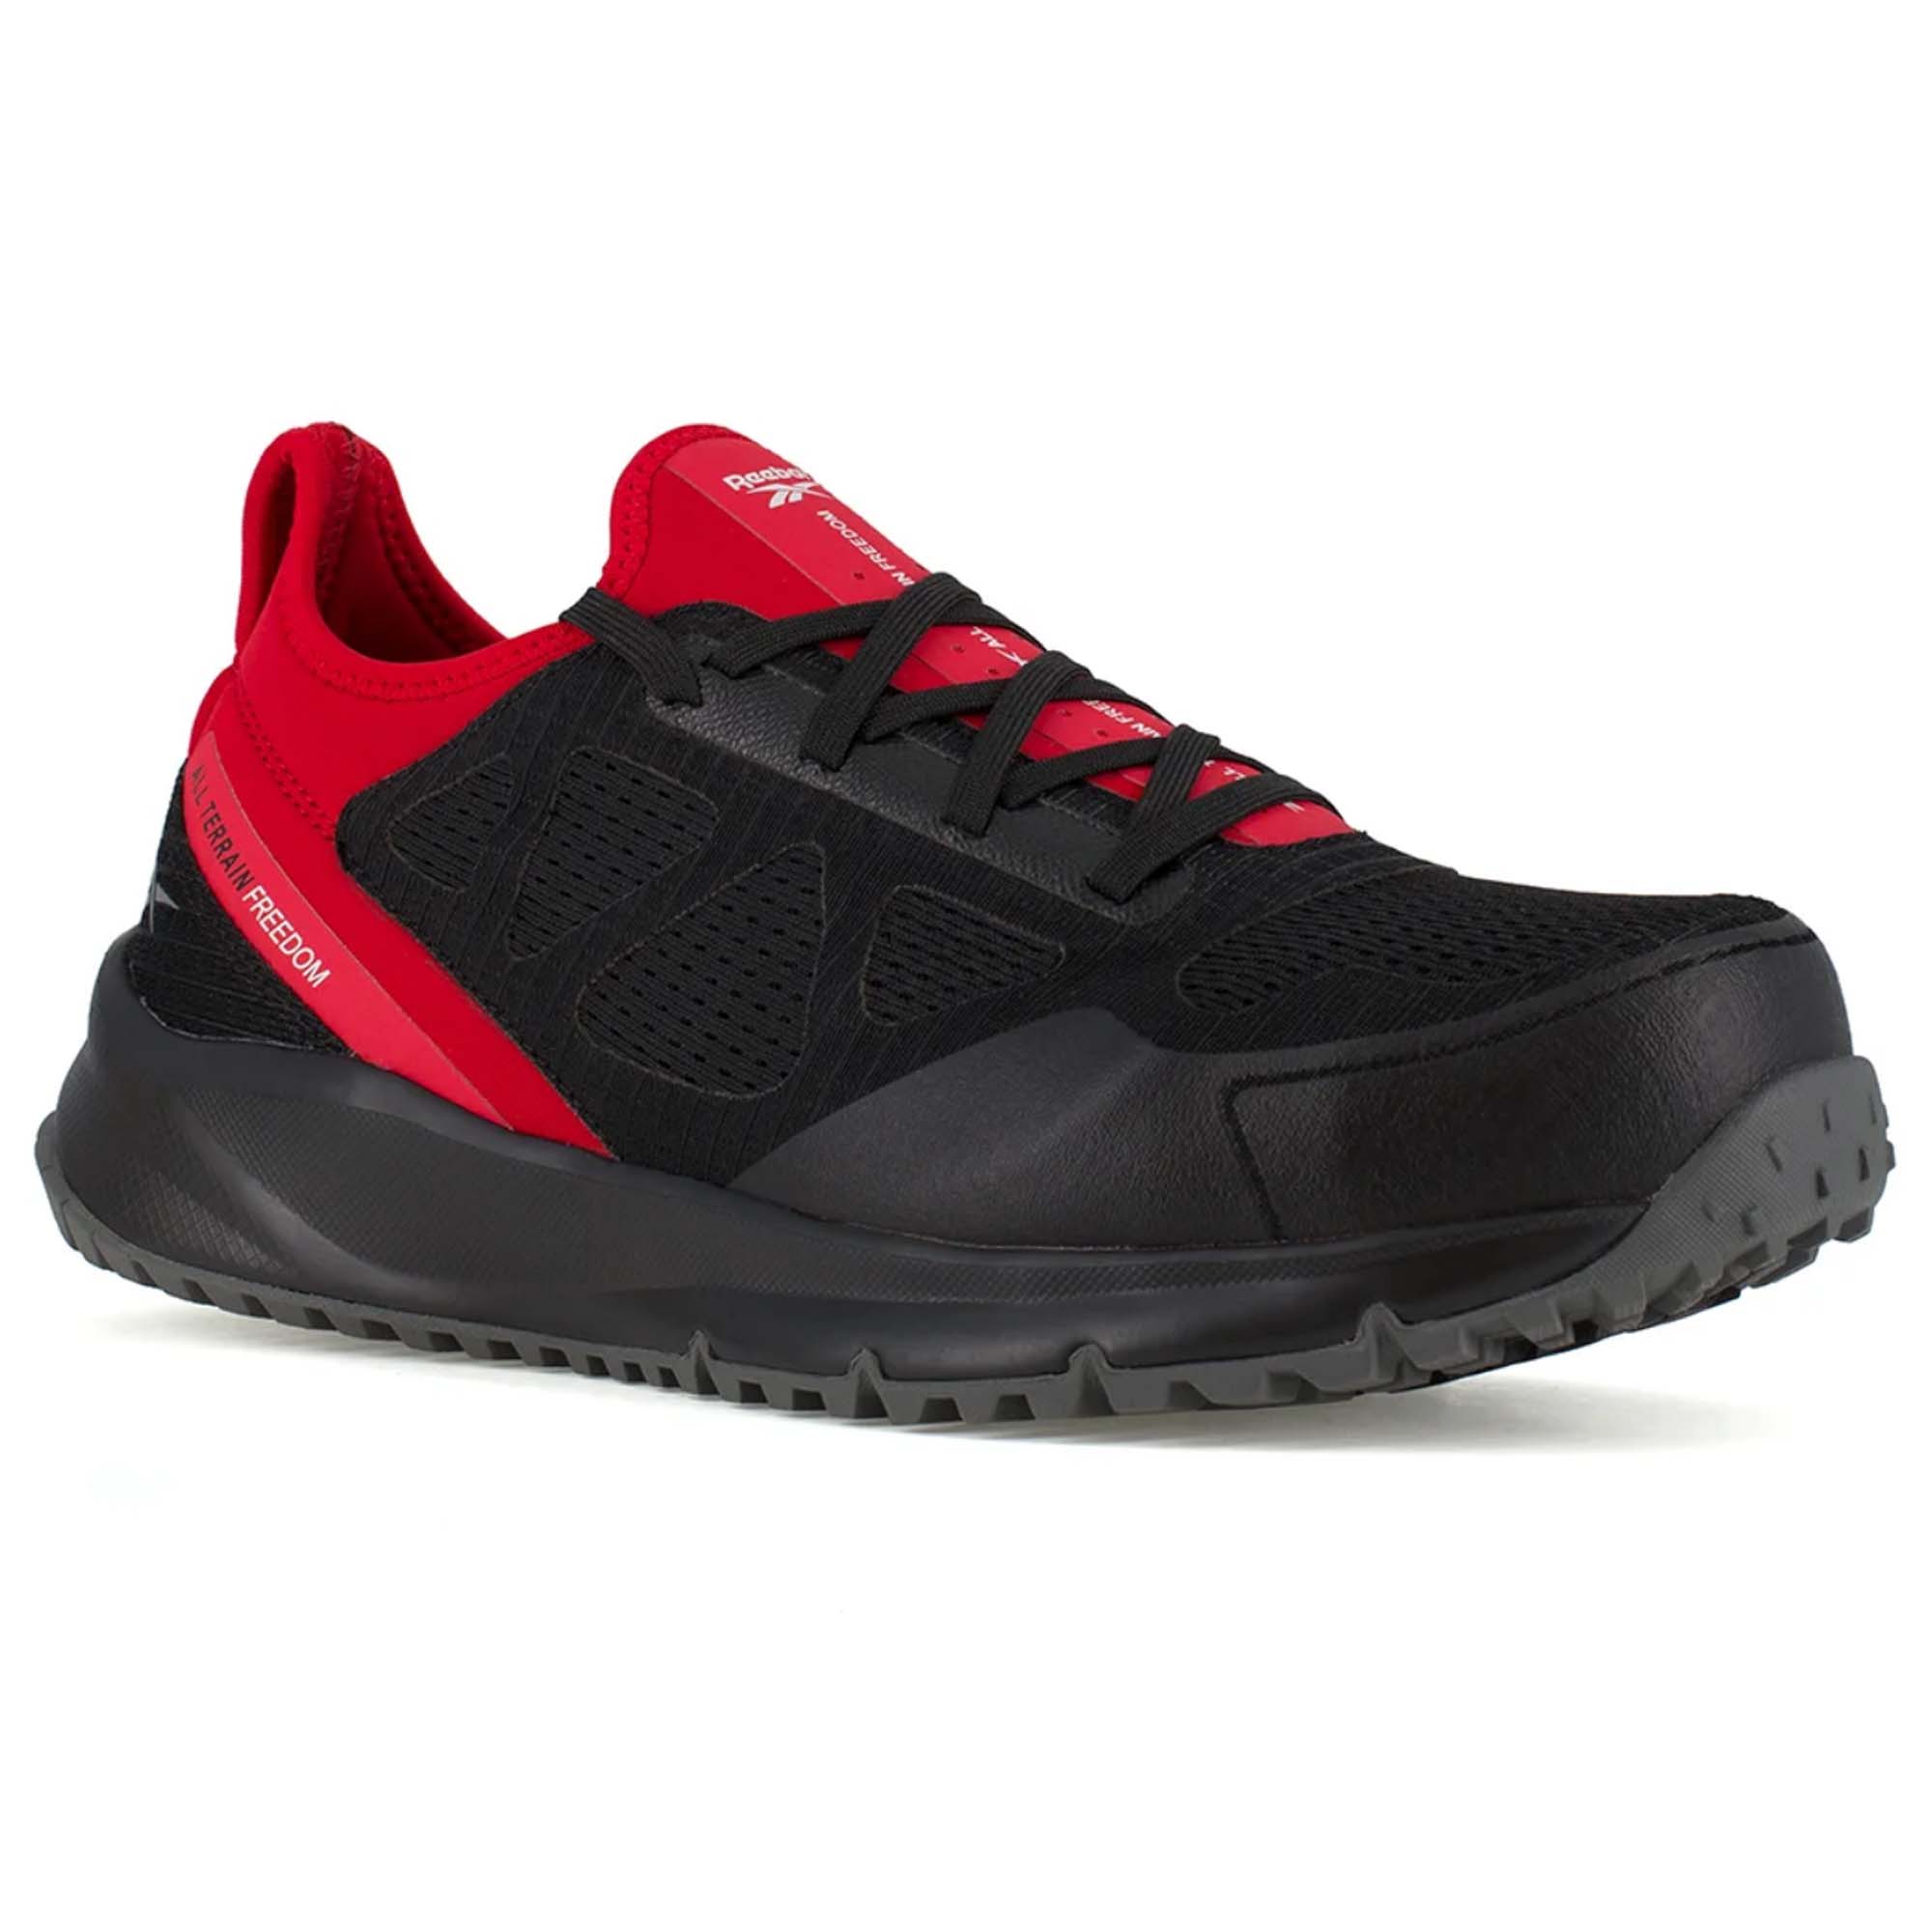 REEBOK | BLACK RED | SPORT OXFORD | Safety Shoes S1P